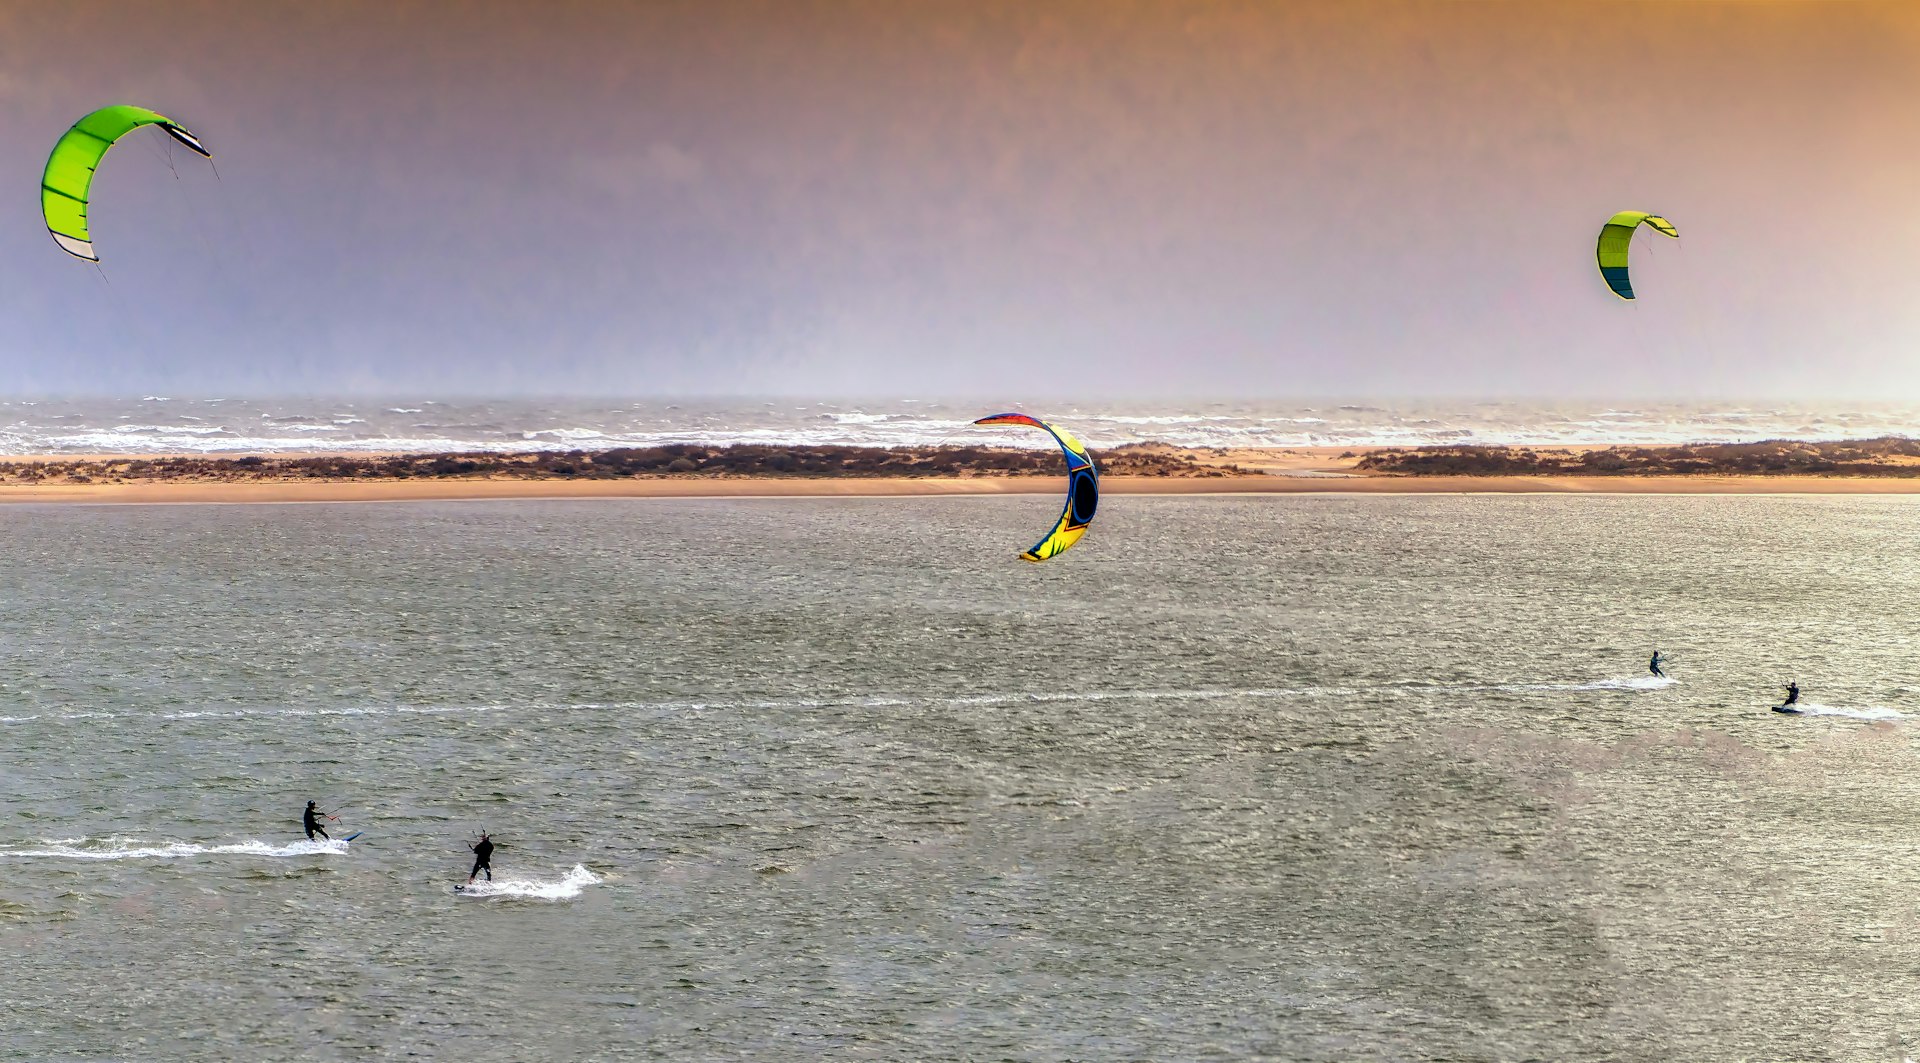 Panoramic view of unidentified people parasailing surfing with windy weather in El Portil, Huelva, Spain.